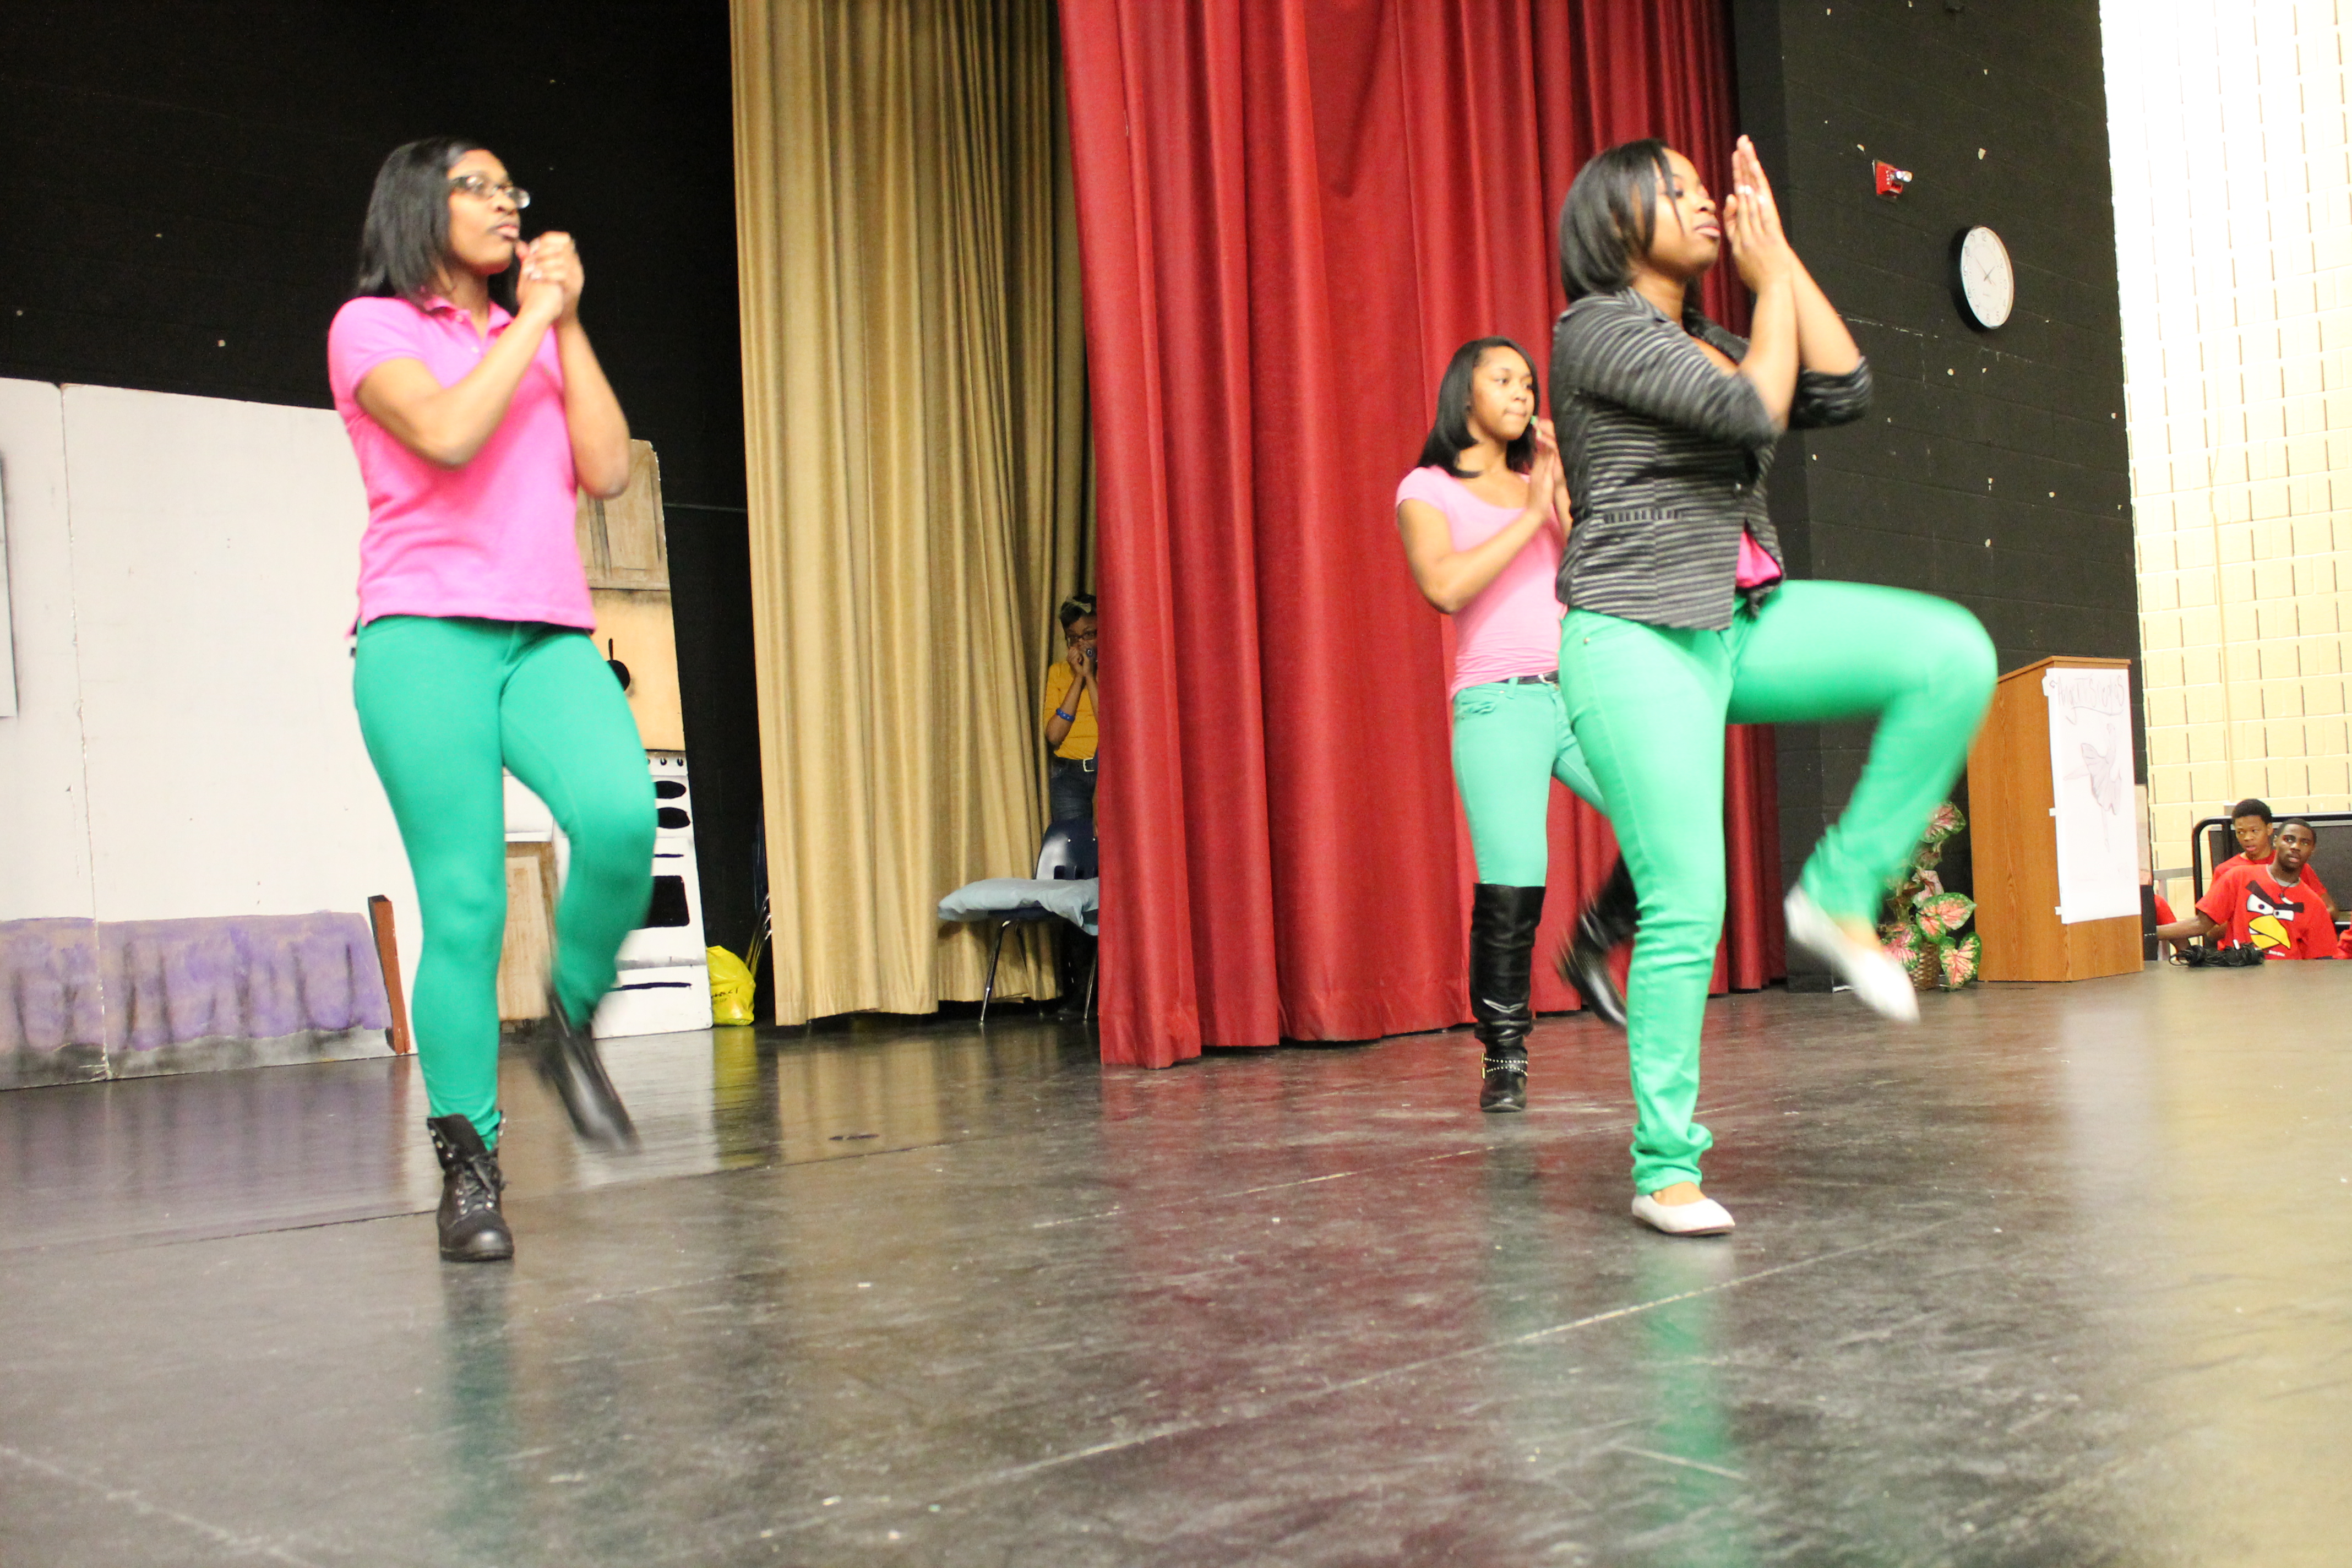 Step Show, the Stage Play & Spring Sisters in Unity Extravaganza Expo Hosted by Kristee Lane, Soul Classics 103.5